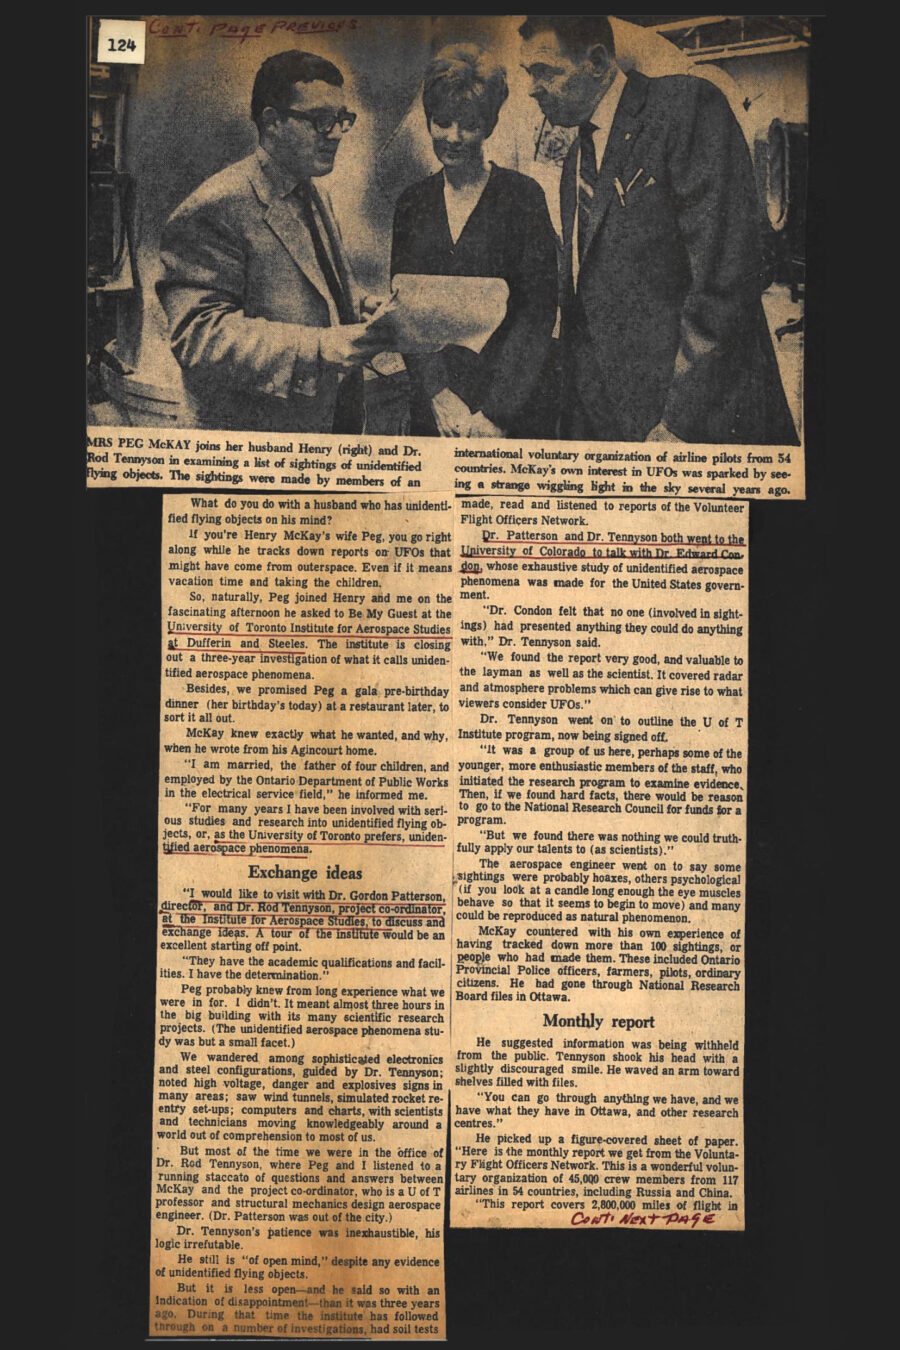 Newspaper clipping from Toronto Daily Star, November 16, 1970
Henry McKay, his wife Peg McKay and Doctor Rod Tennyson examine a paper list of sightings of unidentified flying objects

Caption: Missus Peg McKay joins her husband Henry (right) and Doctor Rod Tennyson in examining a list of sightings of unidentified flying objects. The sightings were made by members of an international voluntary organization of airline pilots from 54 countries. McKay’s own interest in unidentified flying objects was sparked by seeing a strange wiggling light in the sky several years ago.